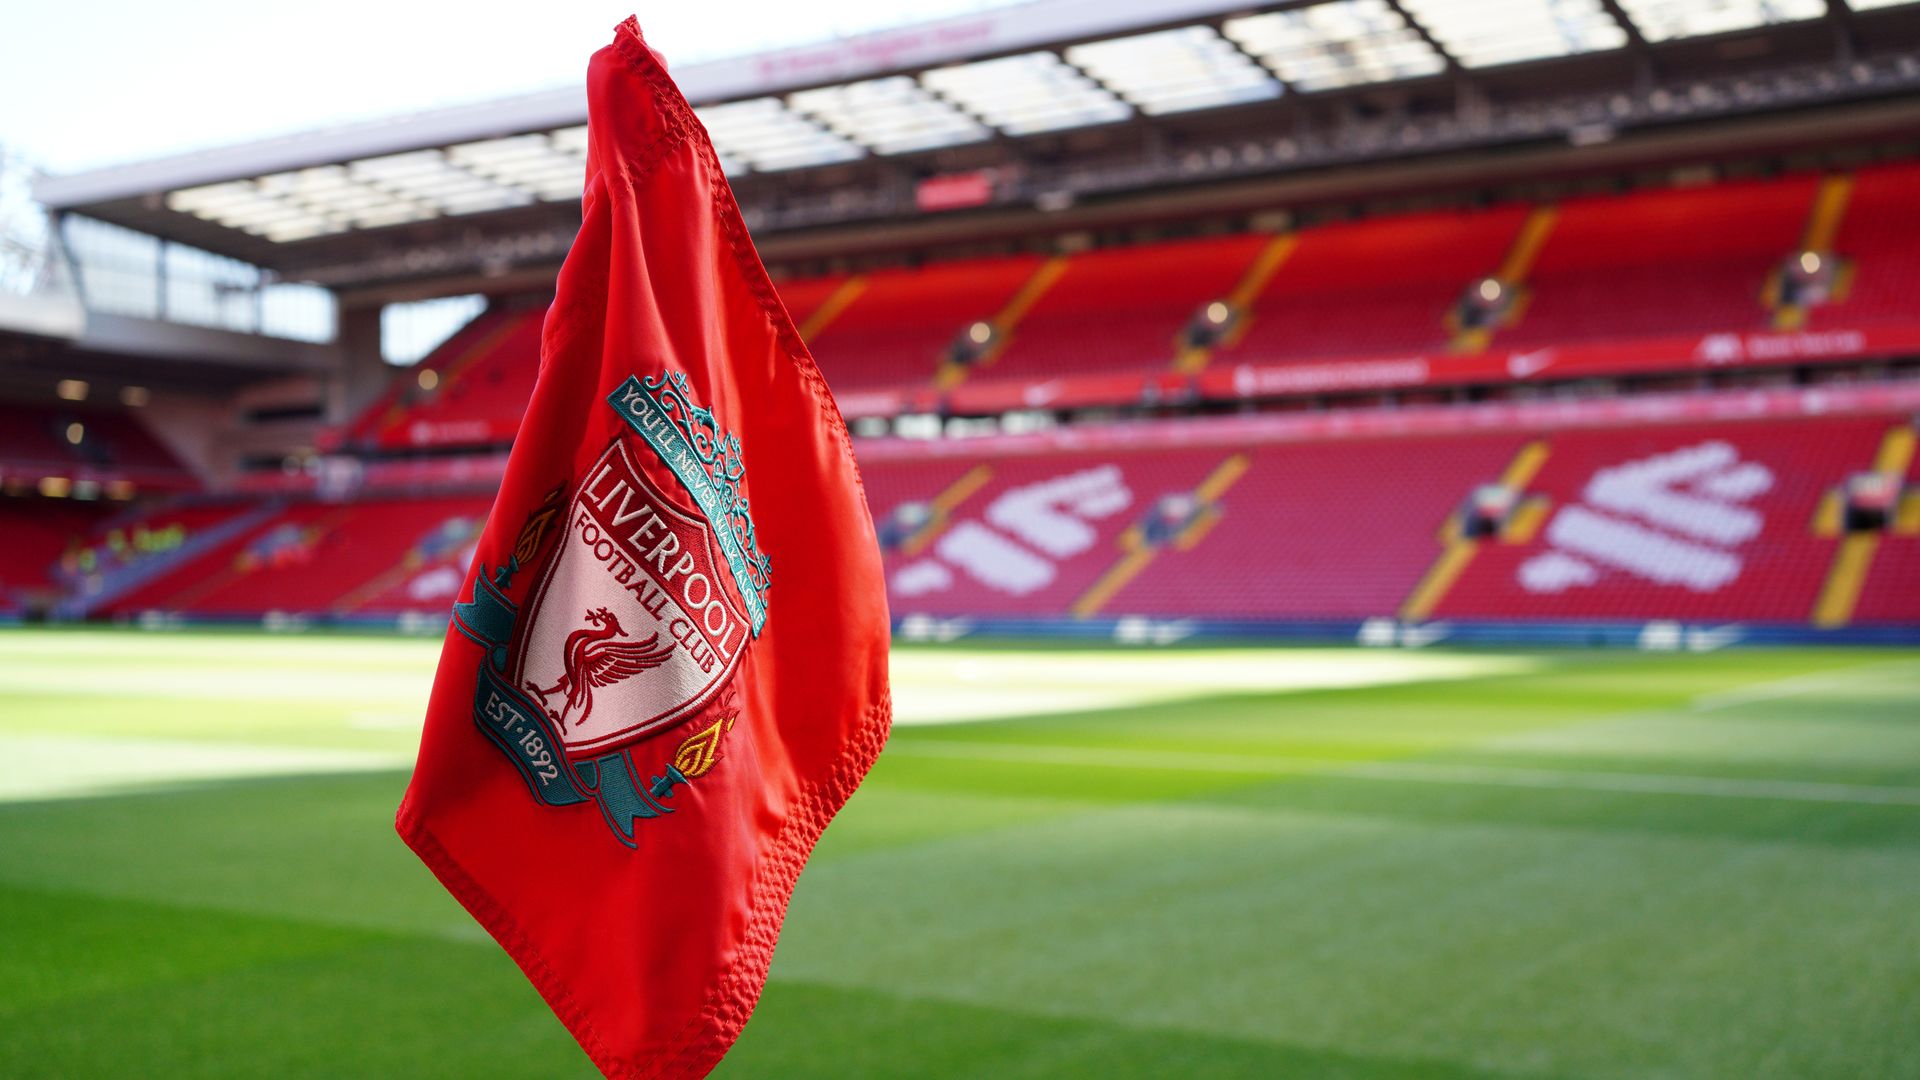 Three men arrested for alleged homophobic chanting at Liverpool vs Chelsea